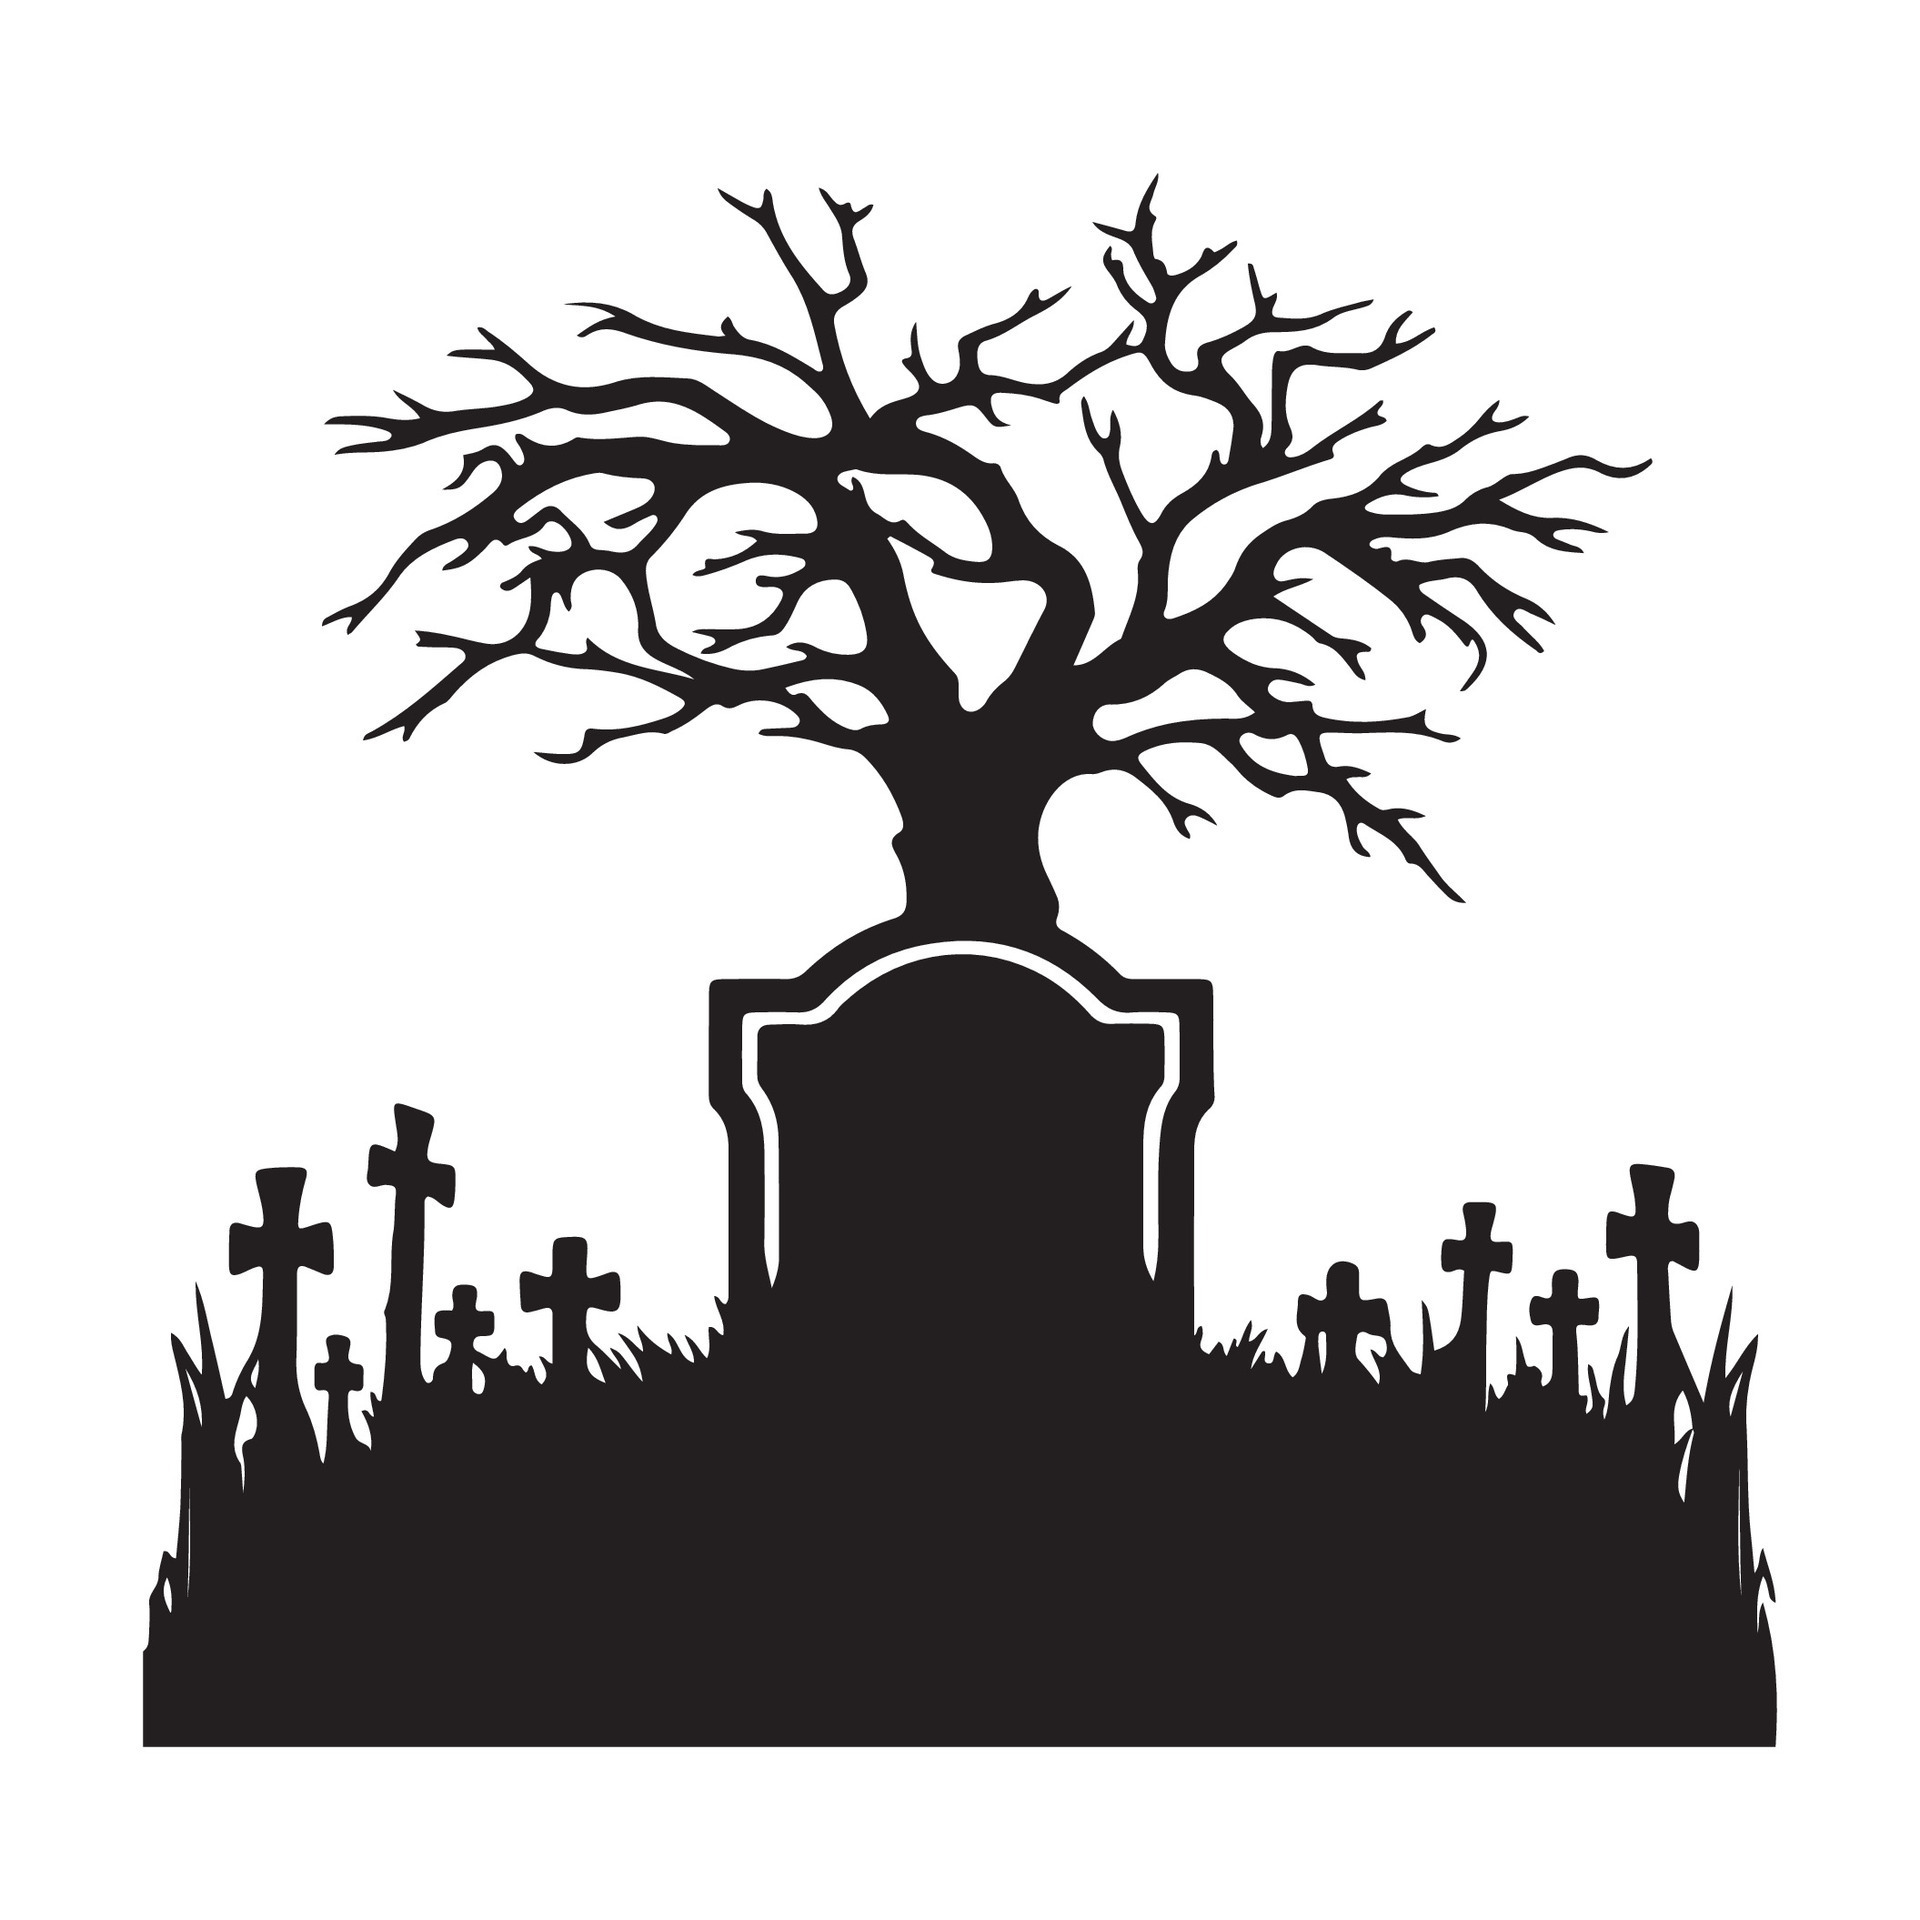 Scary grave halloween design with siluet style and black and white ...